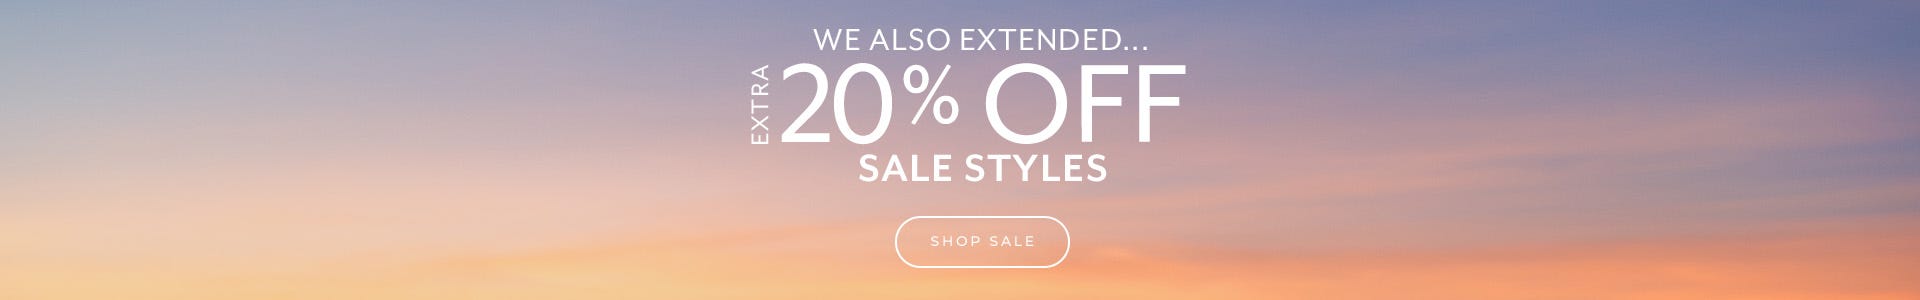 Extended 20% Off Sale Styles